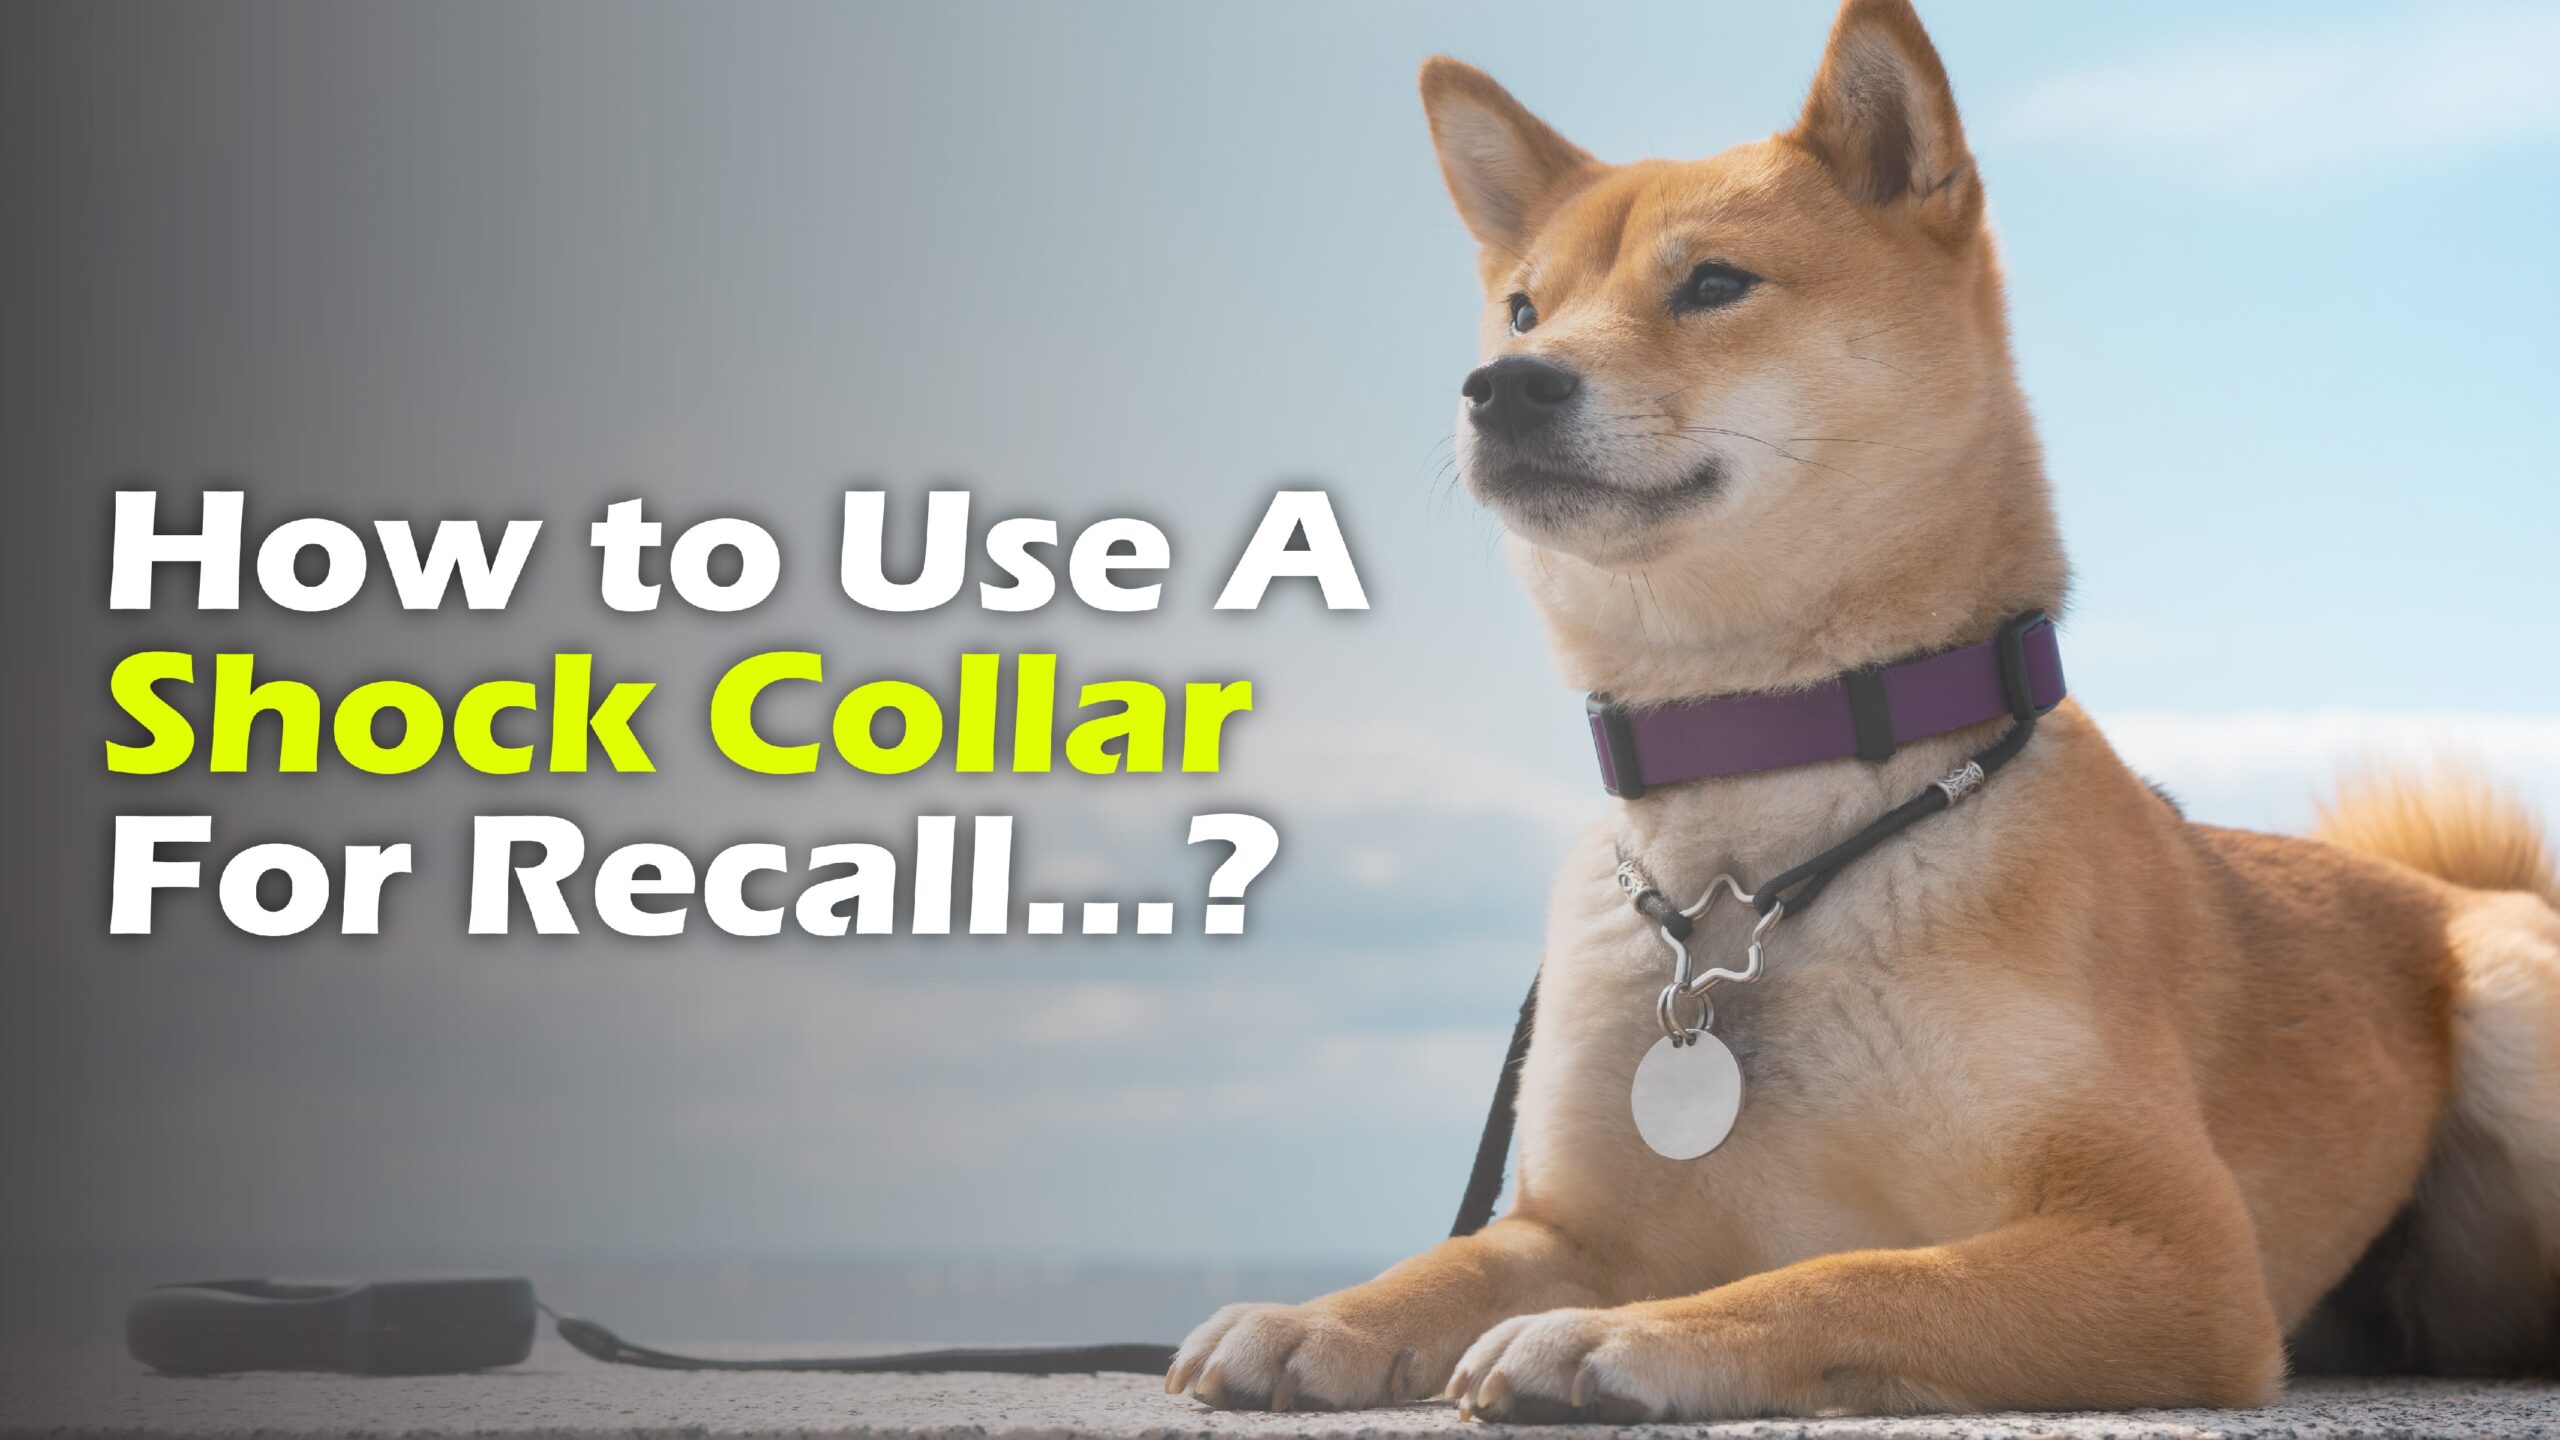 A step-by-step guide on using a shock collar for recall training with a dog.